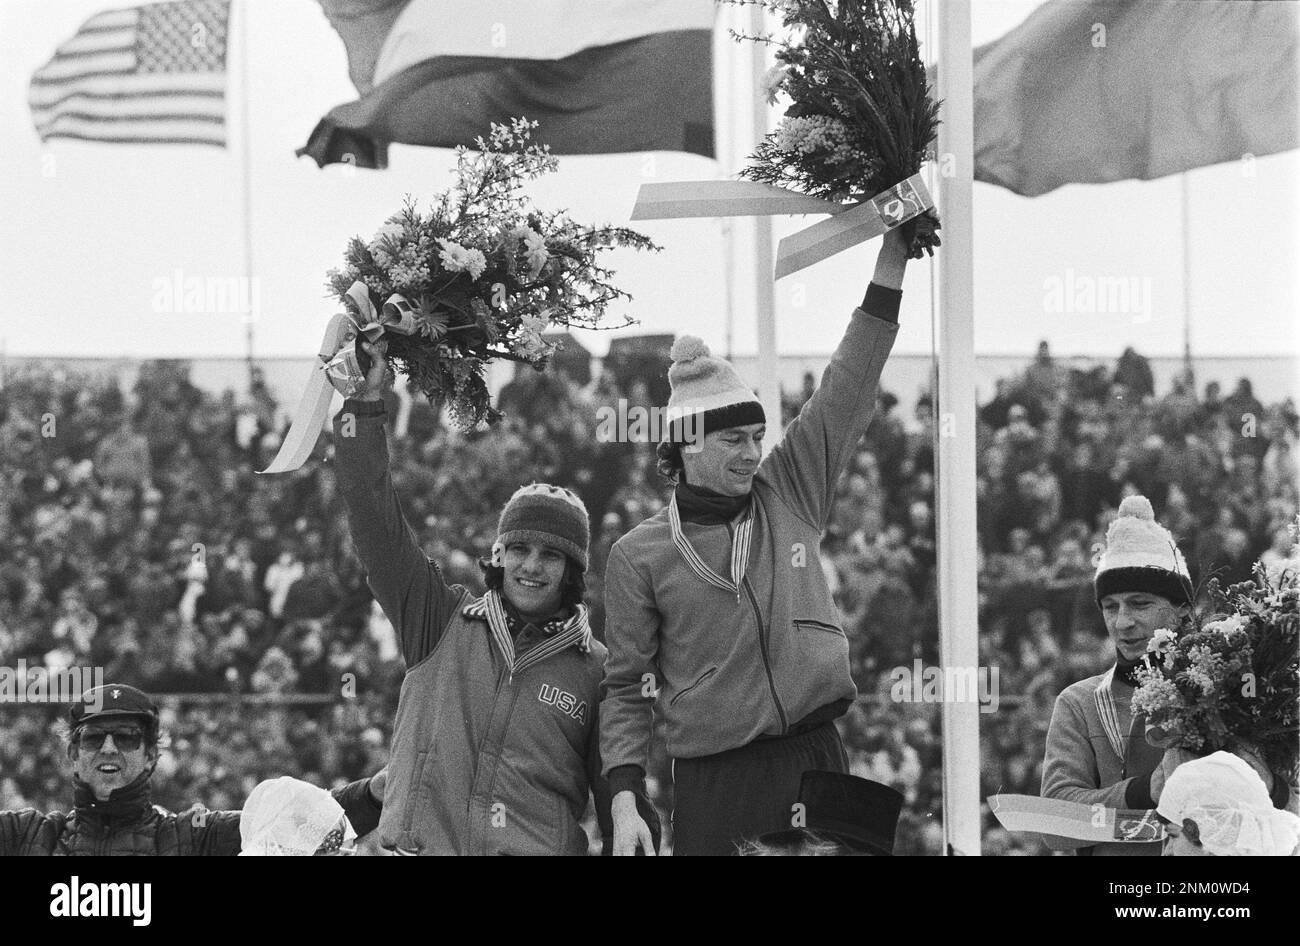 Netherlands History: Men's Allround Speed Skating World Championships in Heerenveen. Award ceremony for the 1500 meters. From left to right: Eric Heiden (United States, second), Hilbert van der Duim (first) and Yep Kramer (third) ca. March 2, 1980 Stock Photo